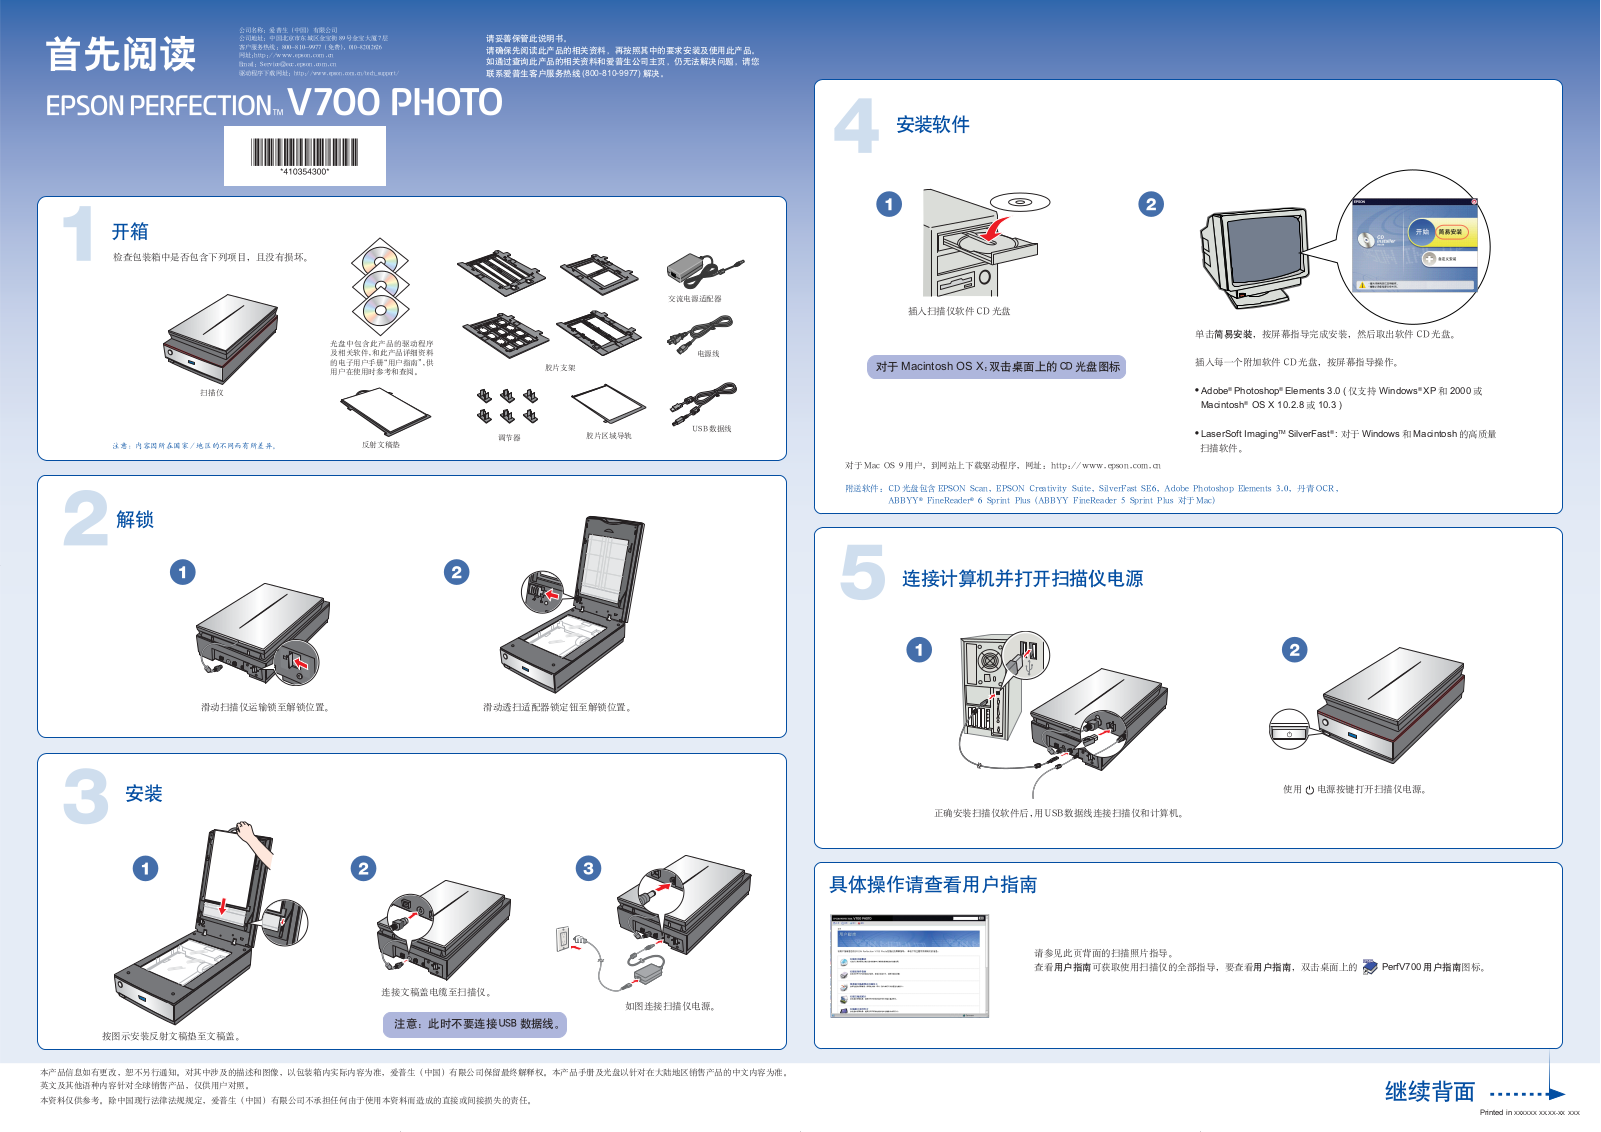 Epson PERFECTION V700 PHOTO Quick start guide